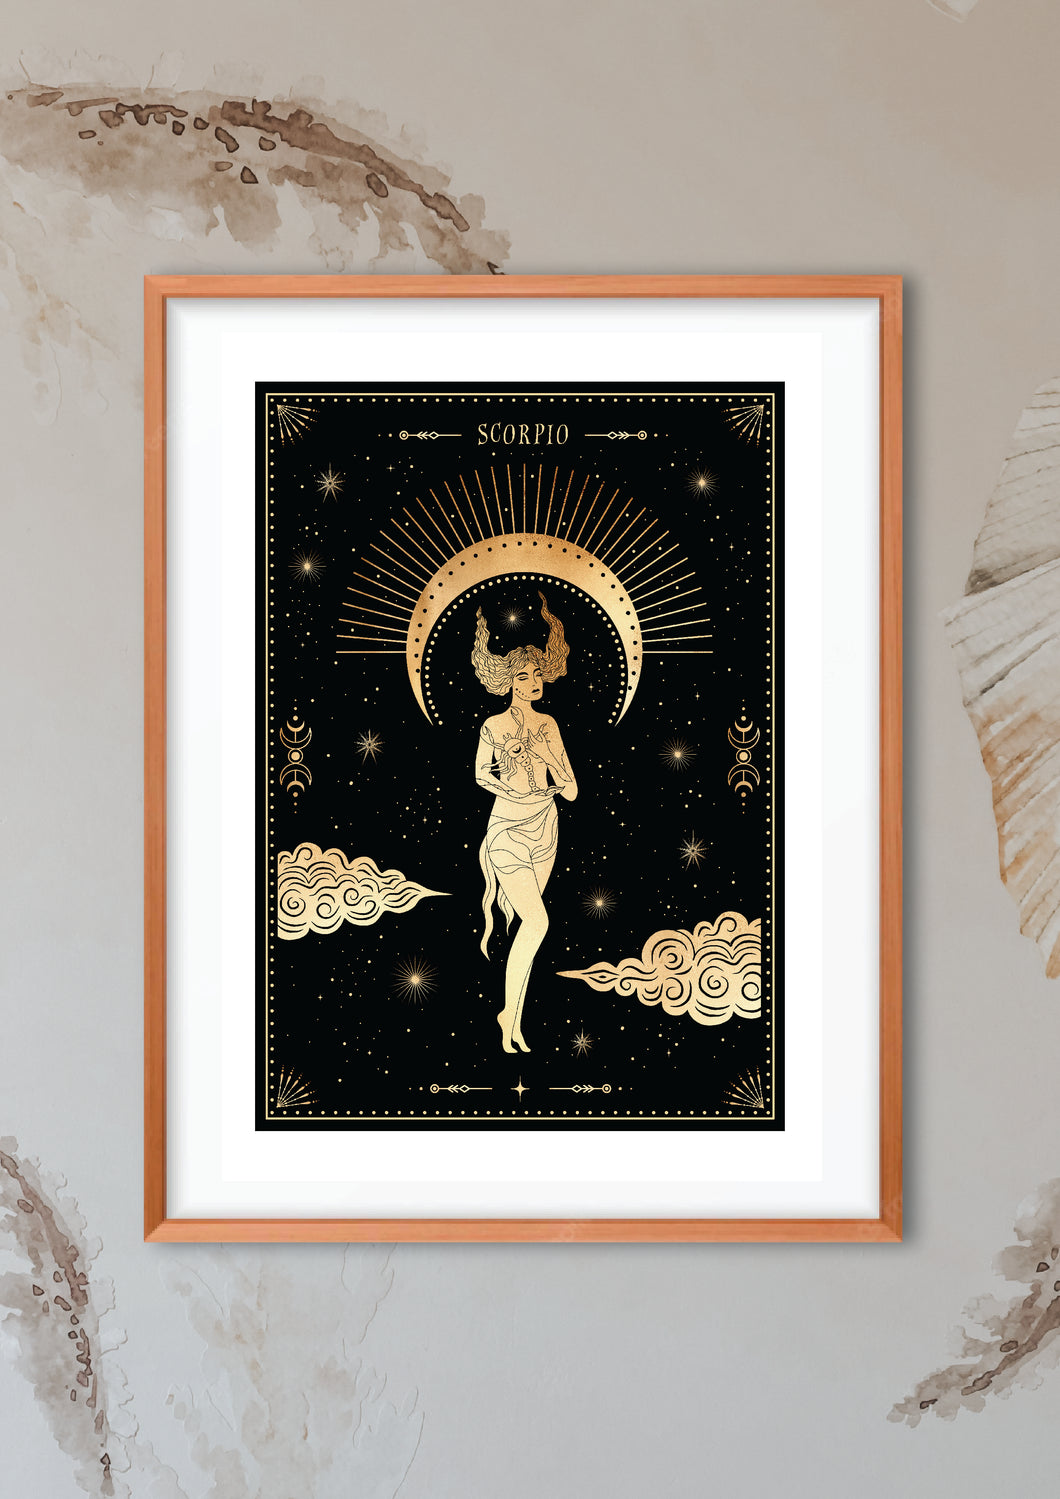 Scorpio Zodiac Art Print. This print could fit beautifully into any room in your home. Mystical, celestial and whimsical wall art. Simply download, print and enjoy! 